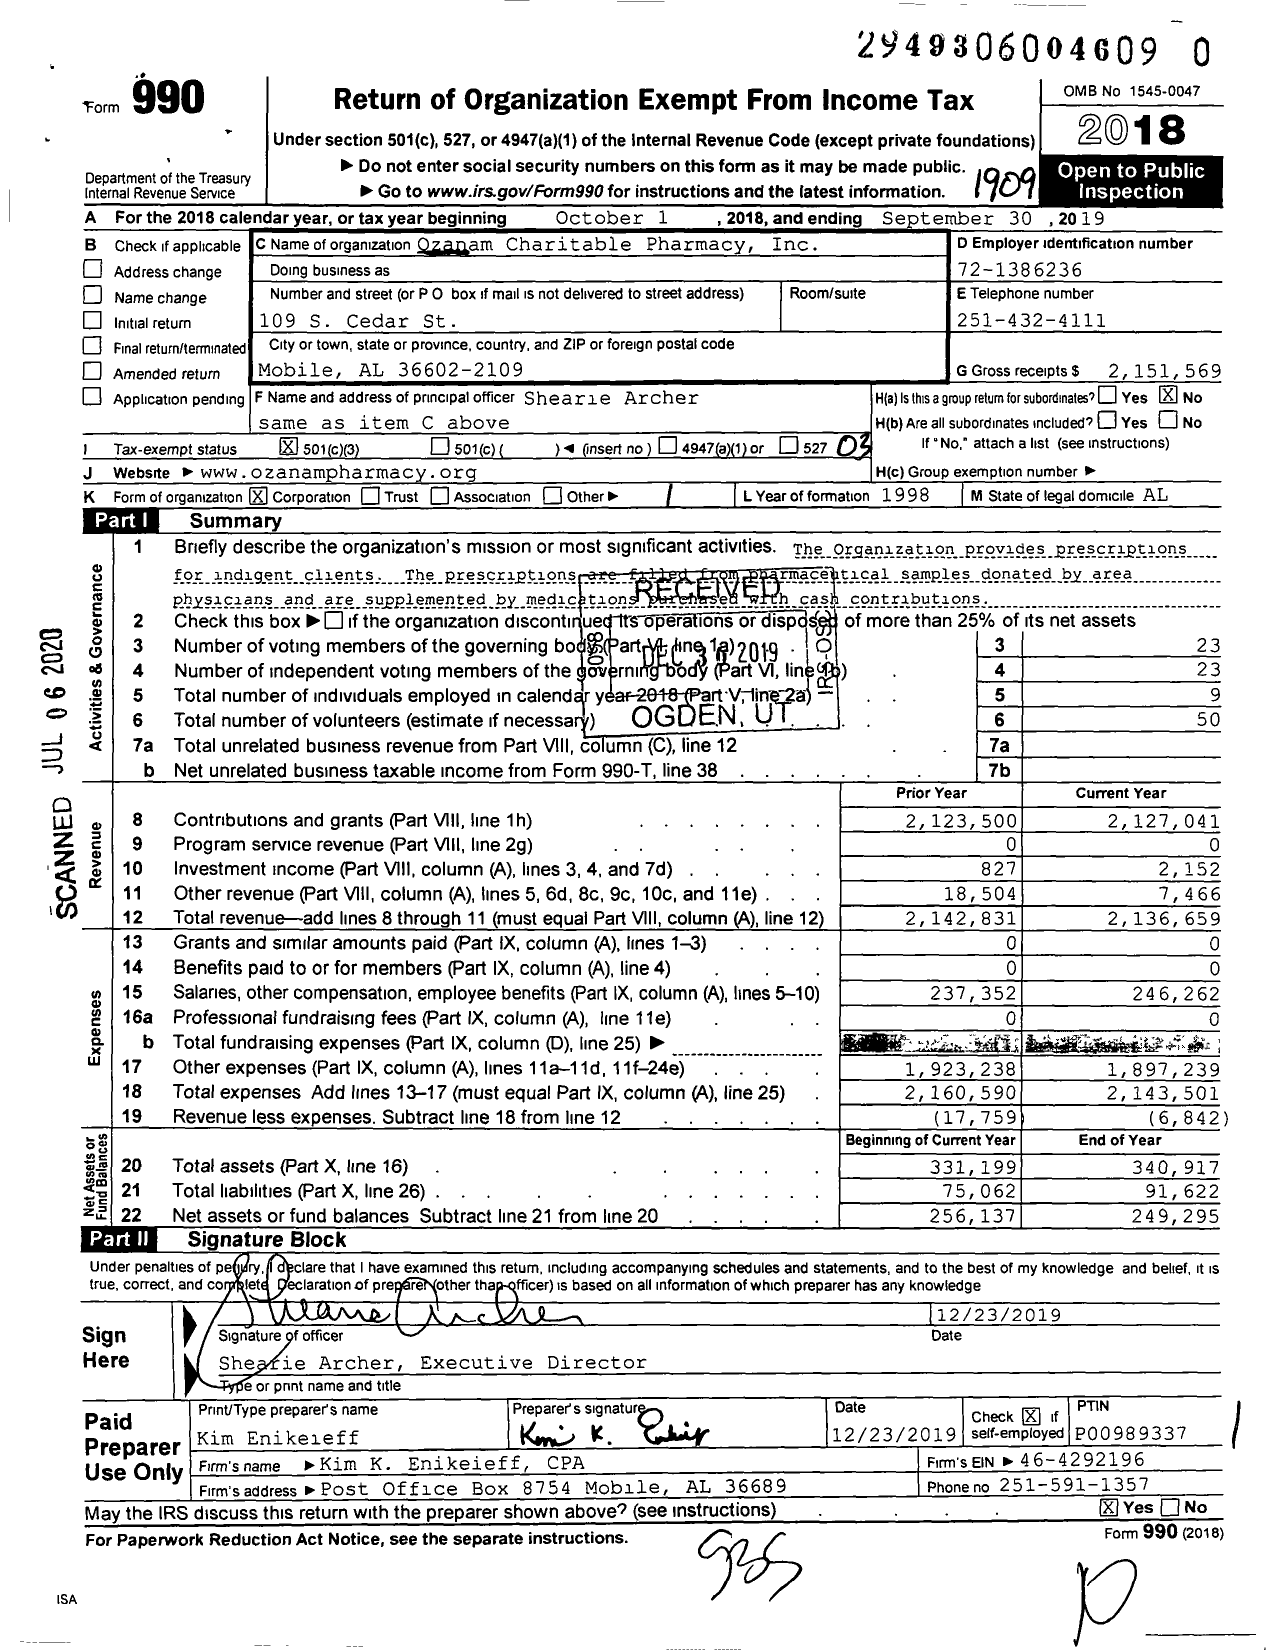 Image of first page of 2018 Form 990 for Ozanam Charitable Pharmacy